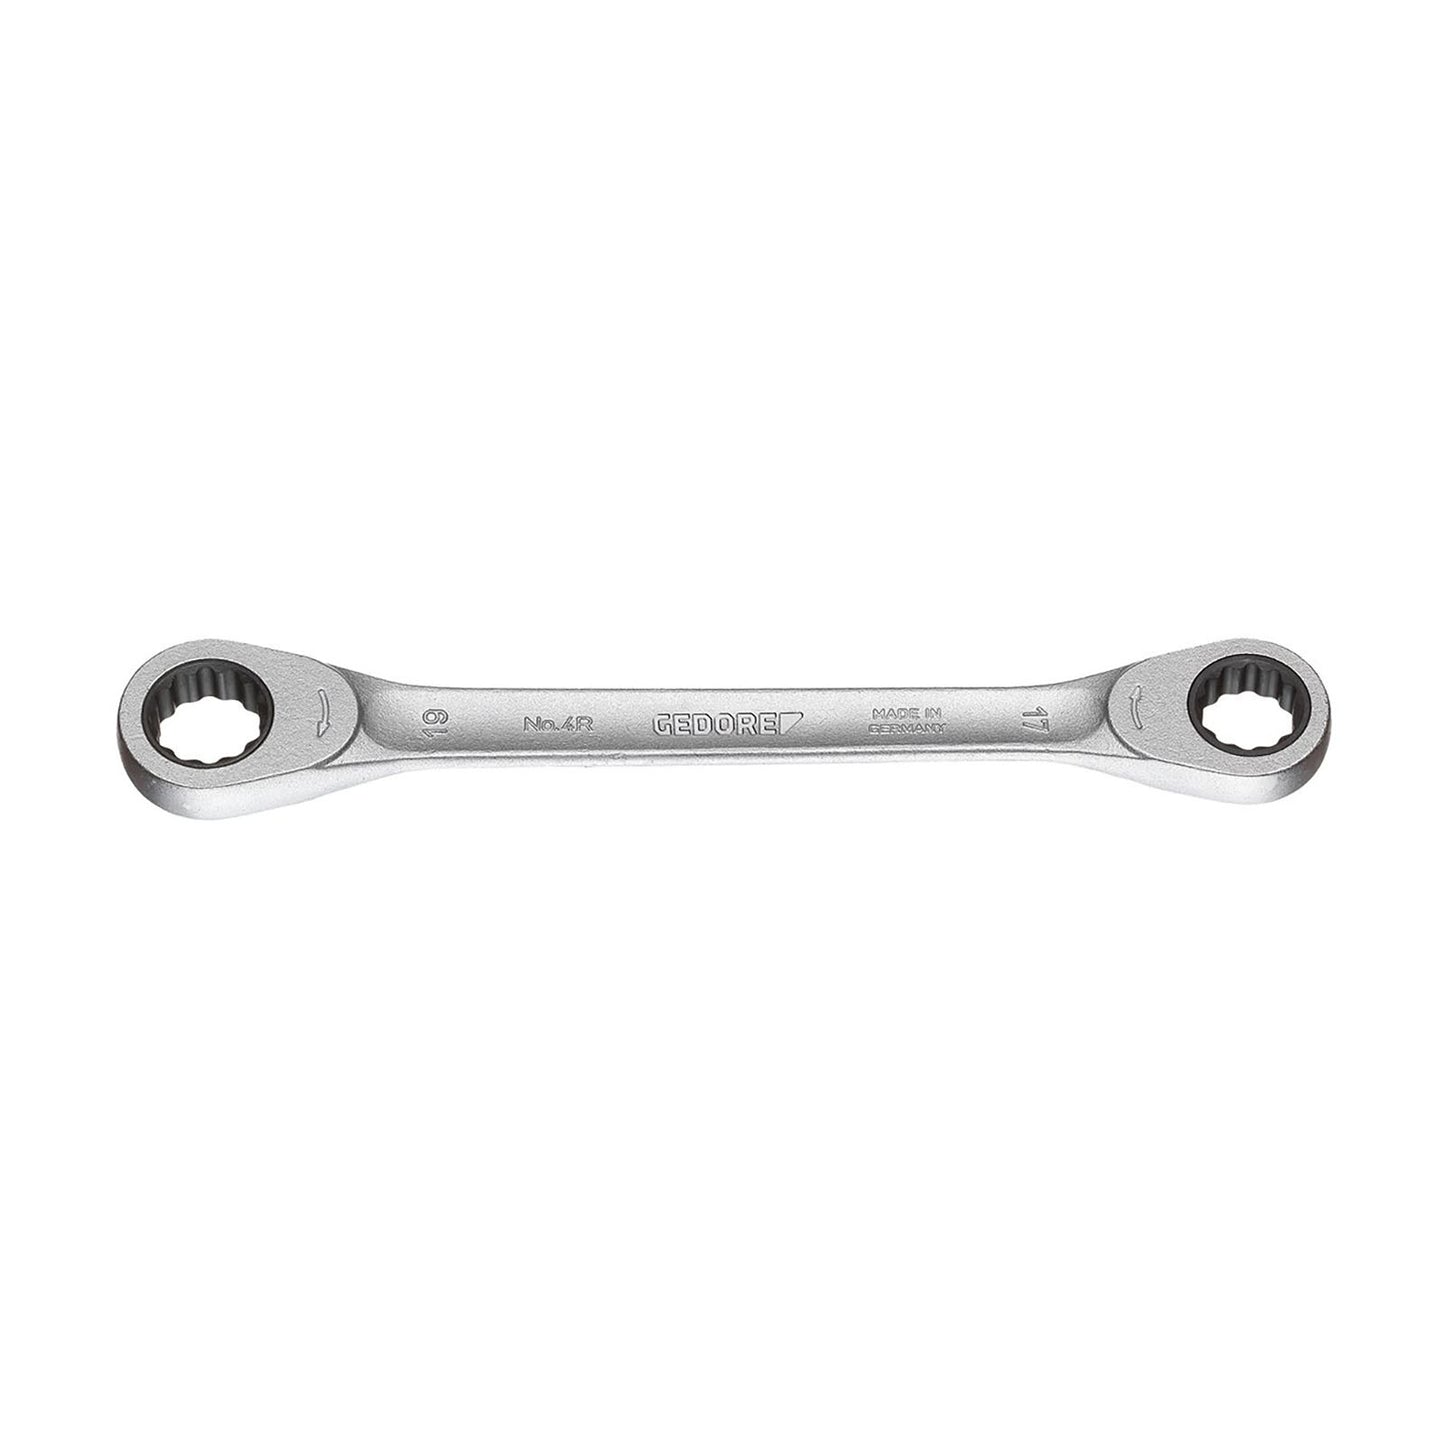 GEDORE 4 R 10X13 - Flat ratchet wrench, 10x13 (2306751)